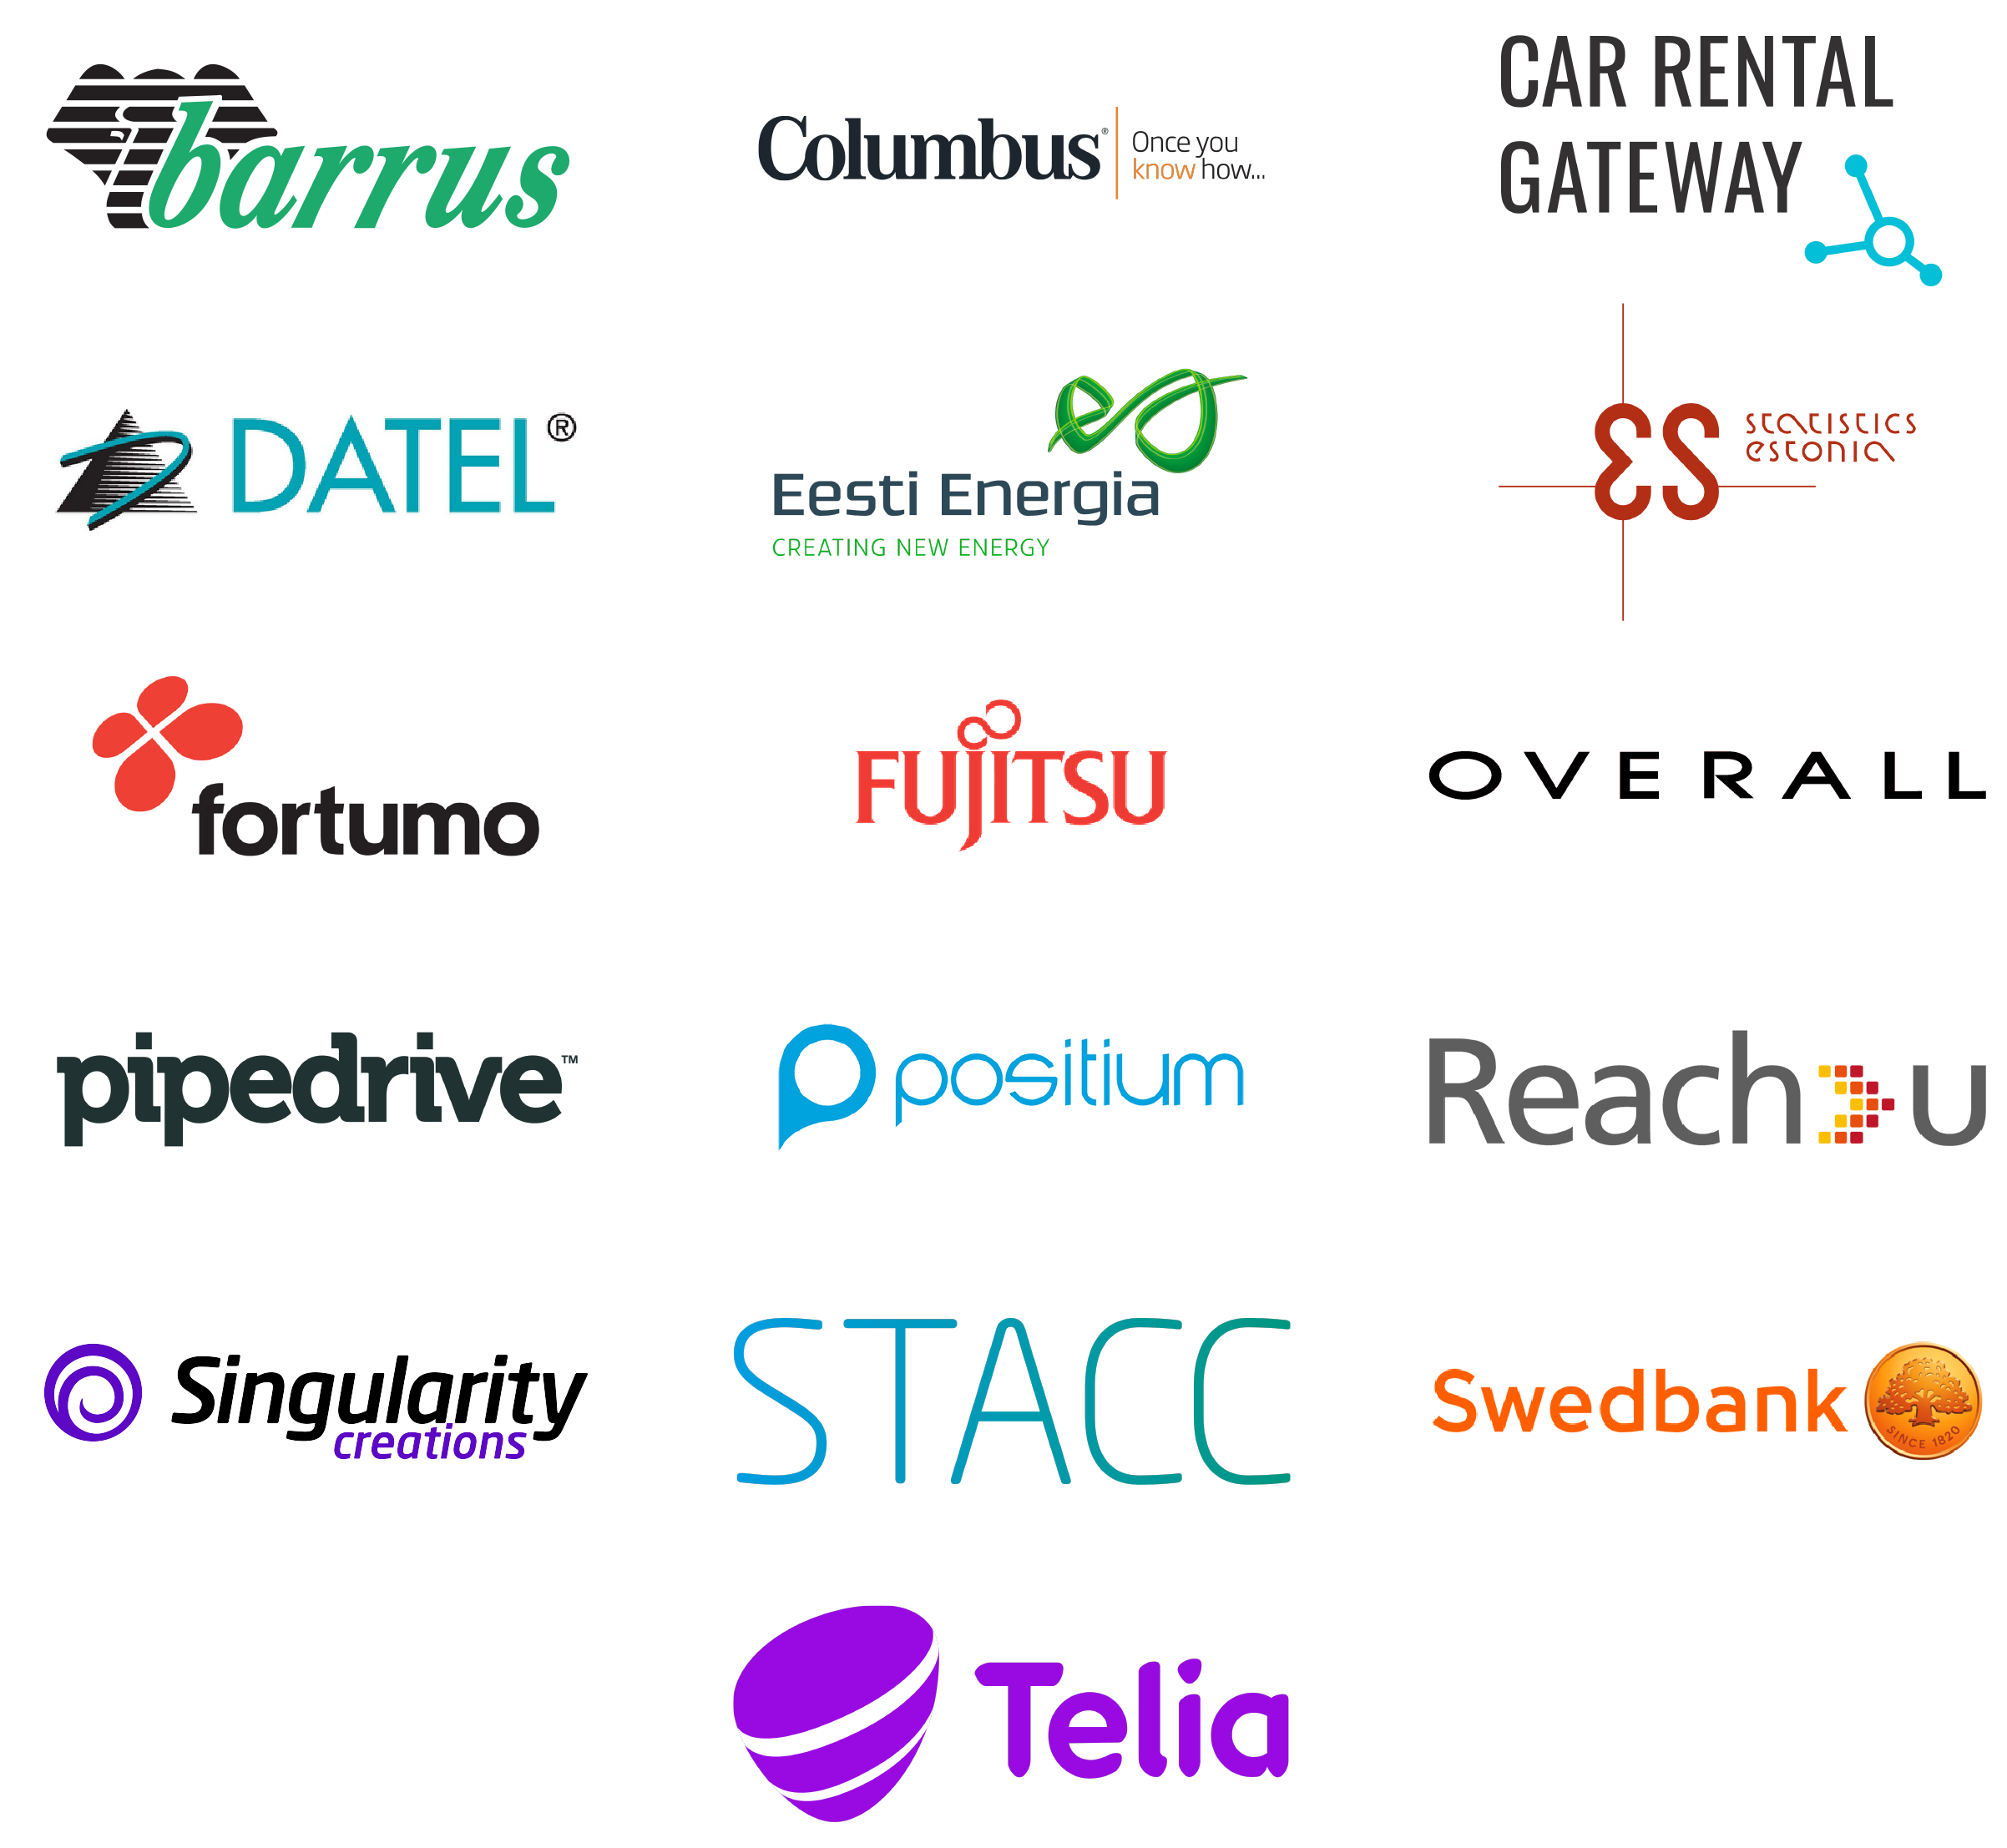 Partners that have participated in the program.